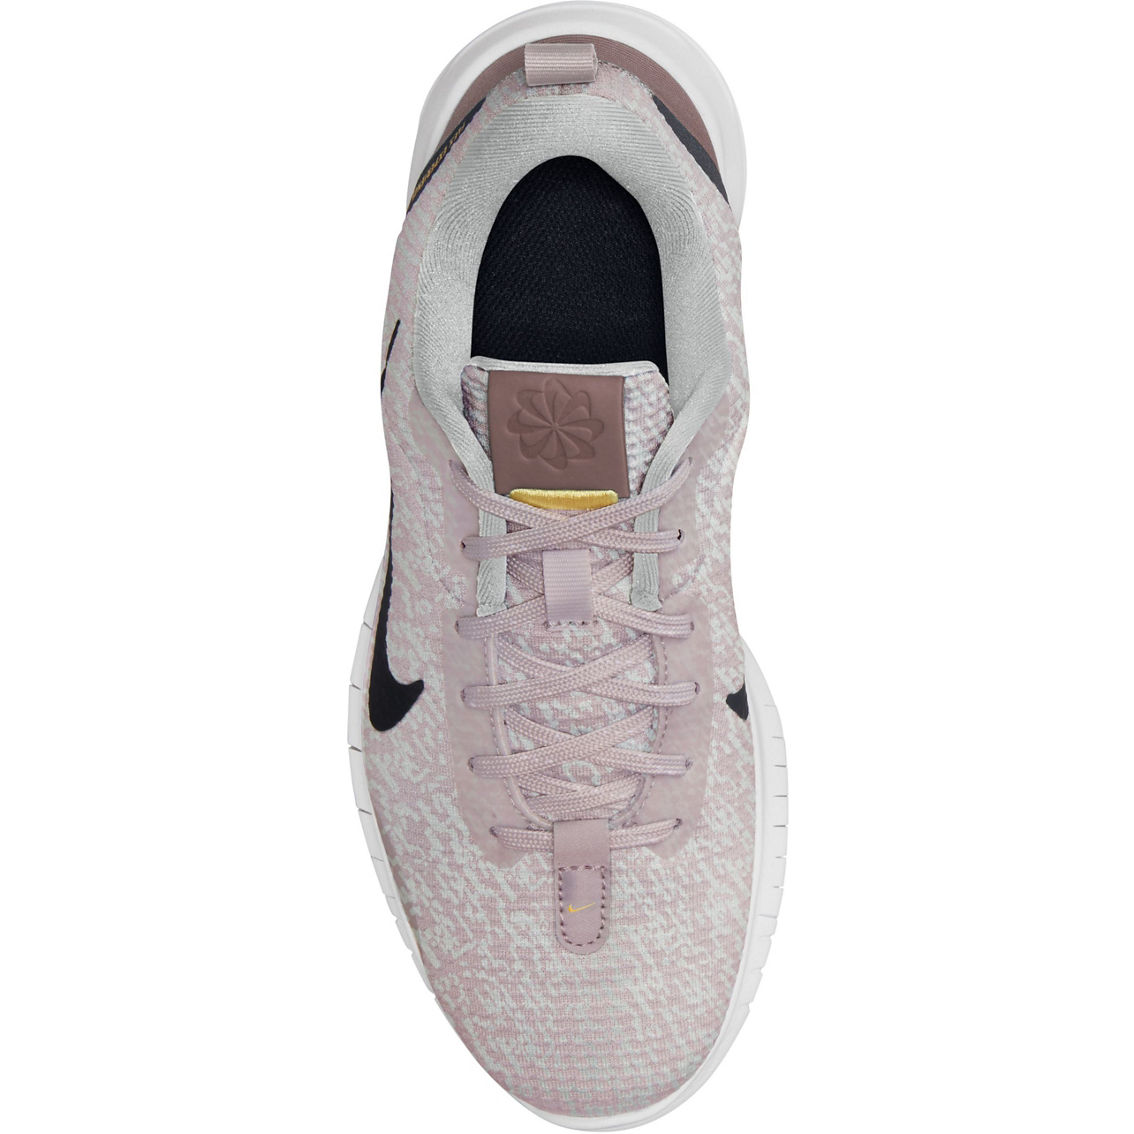 Nike Women's Flex Experience RN 12 Running Shoes - Image 4 of 9